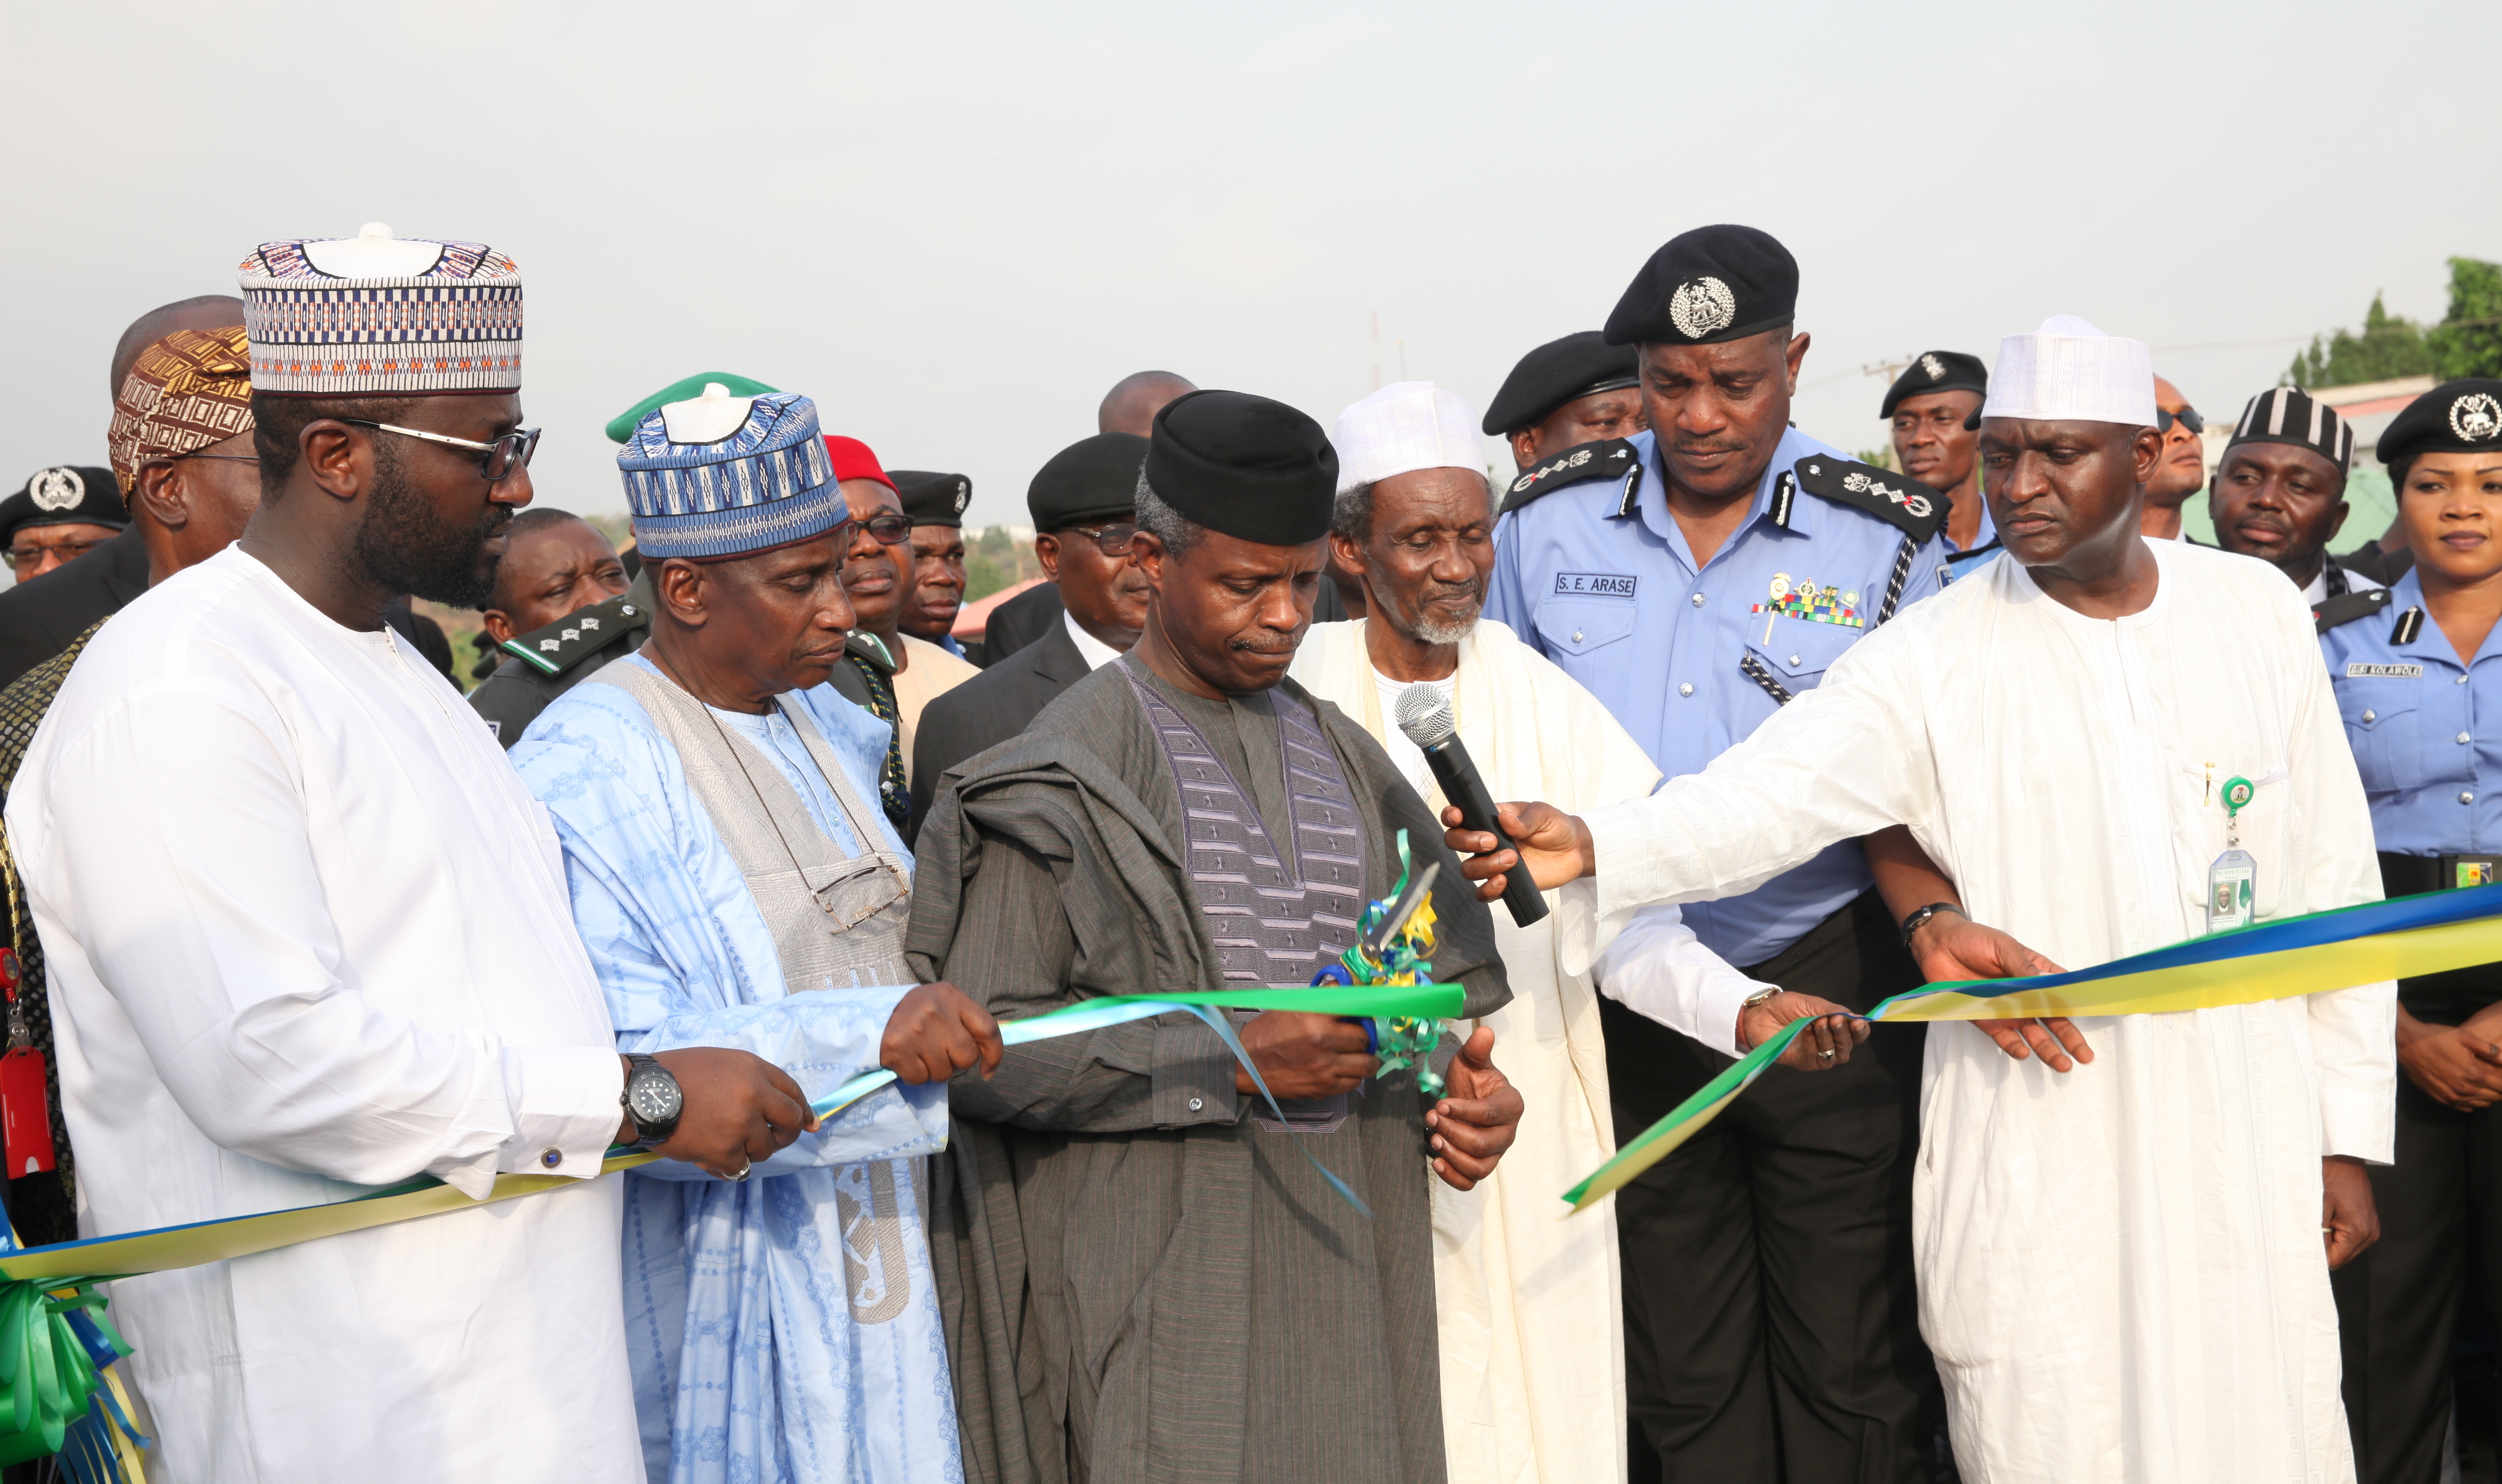 VP Osinbajo At The Commissioning Of Police Legal Building, Launch Of Operational Vehicles & City Watch Patrol Scheme On 18/03/2016